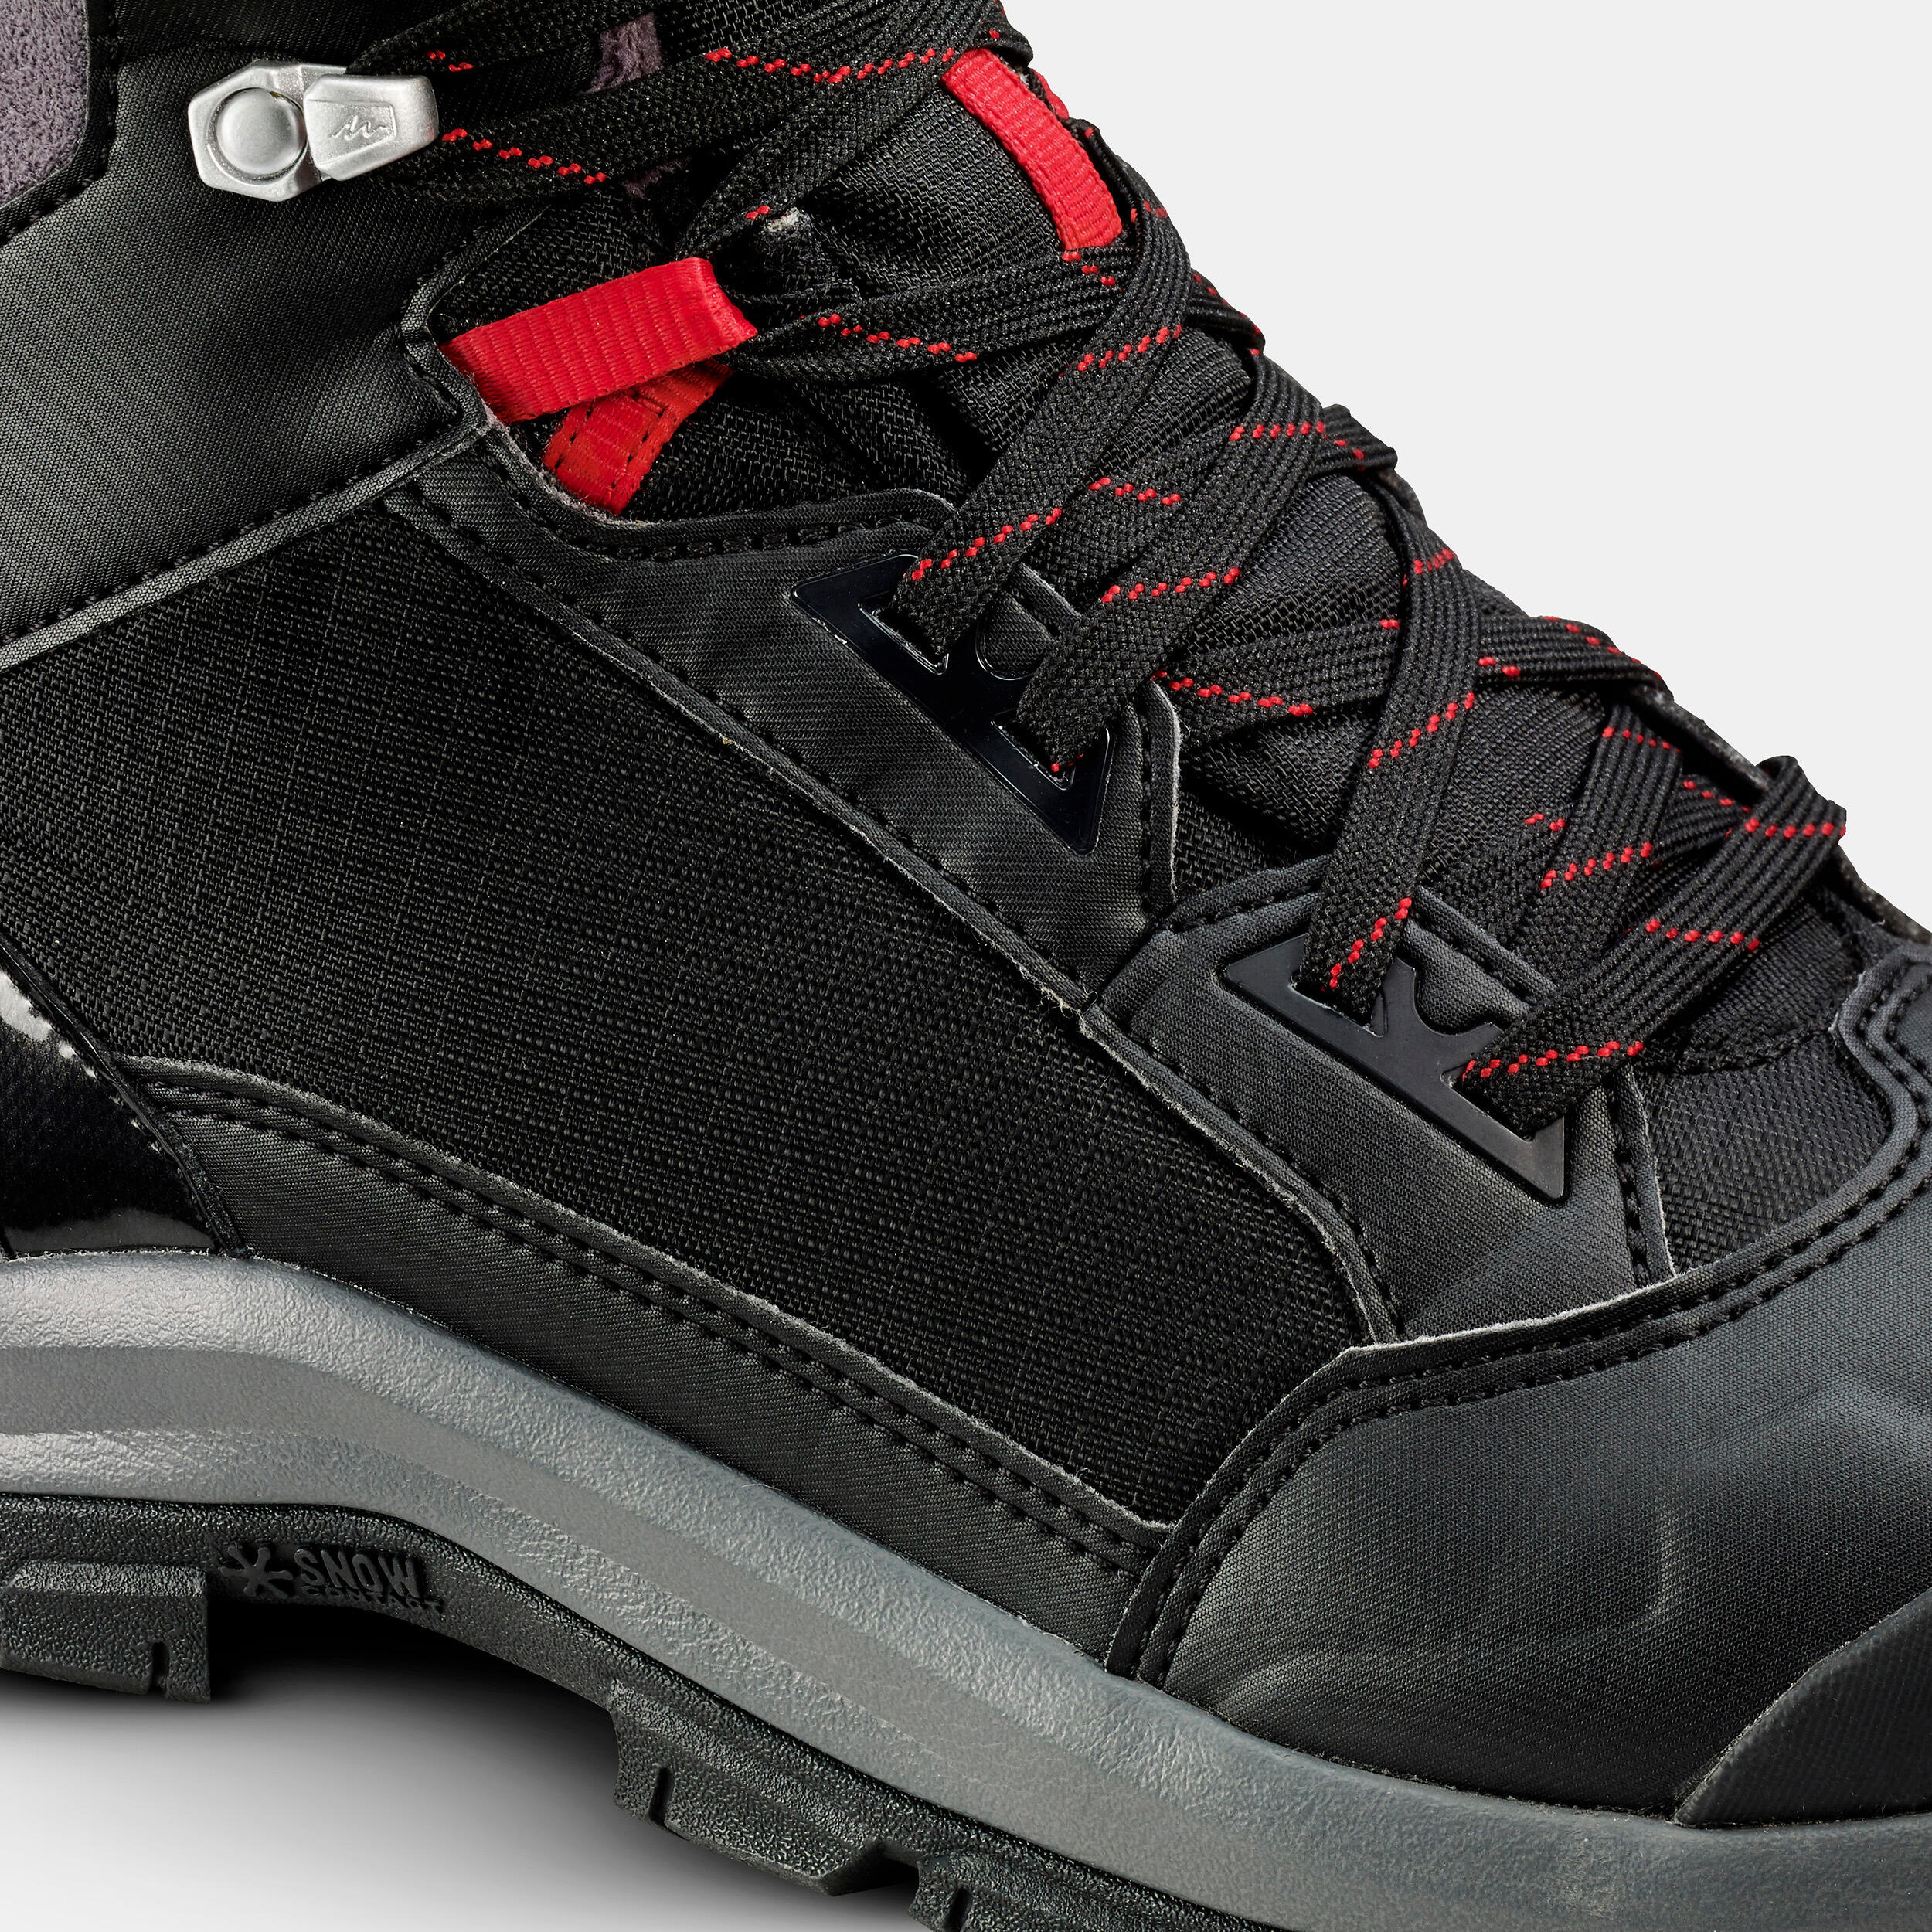 Men’s Warm and Waterproof Hiking Boots - SH500 mountain MID 7/11